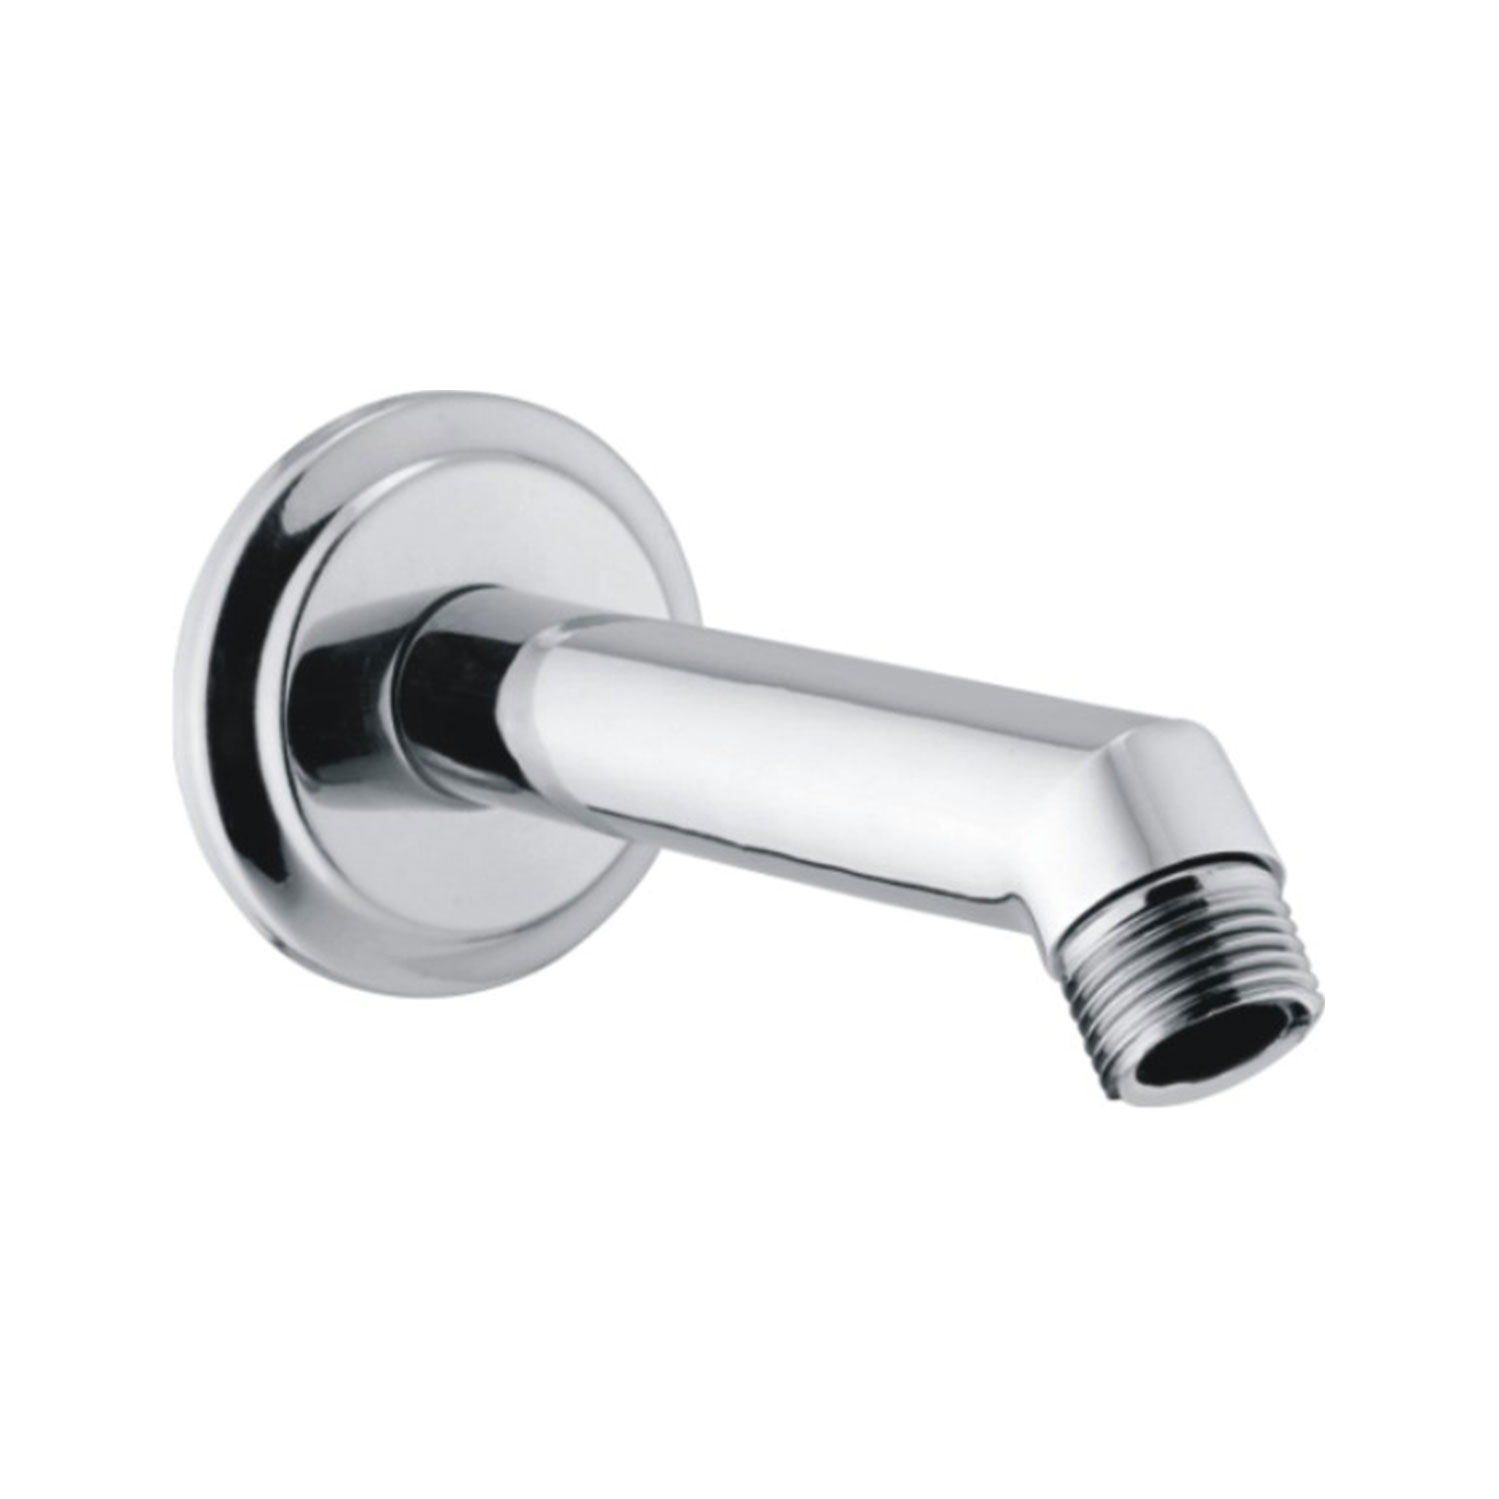 Shower Arm with Flange